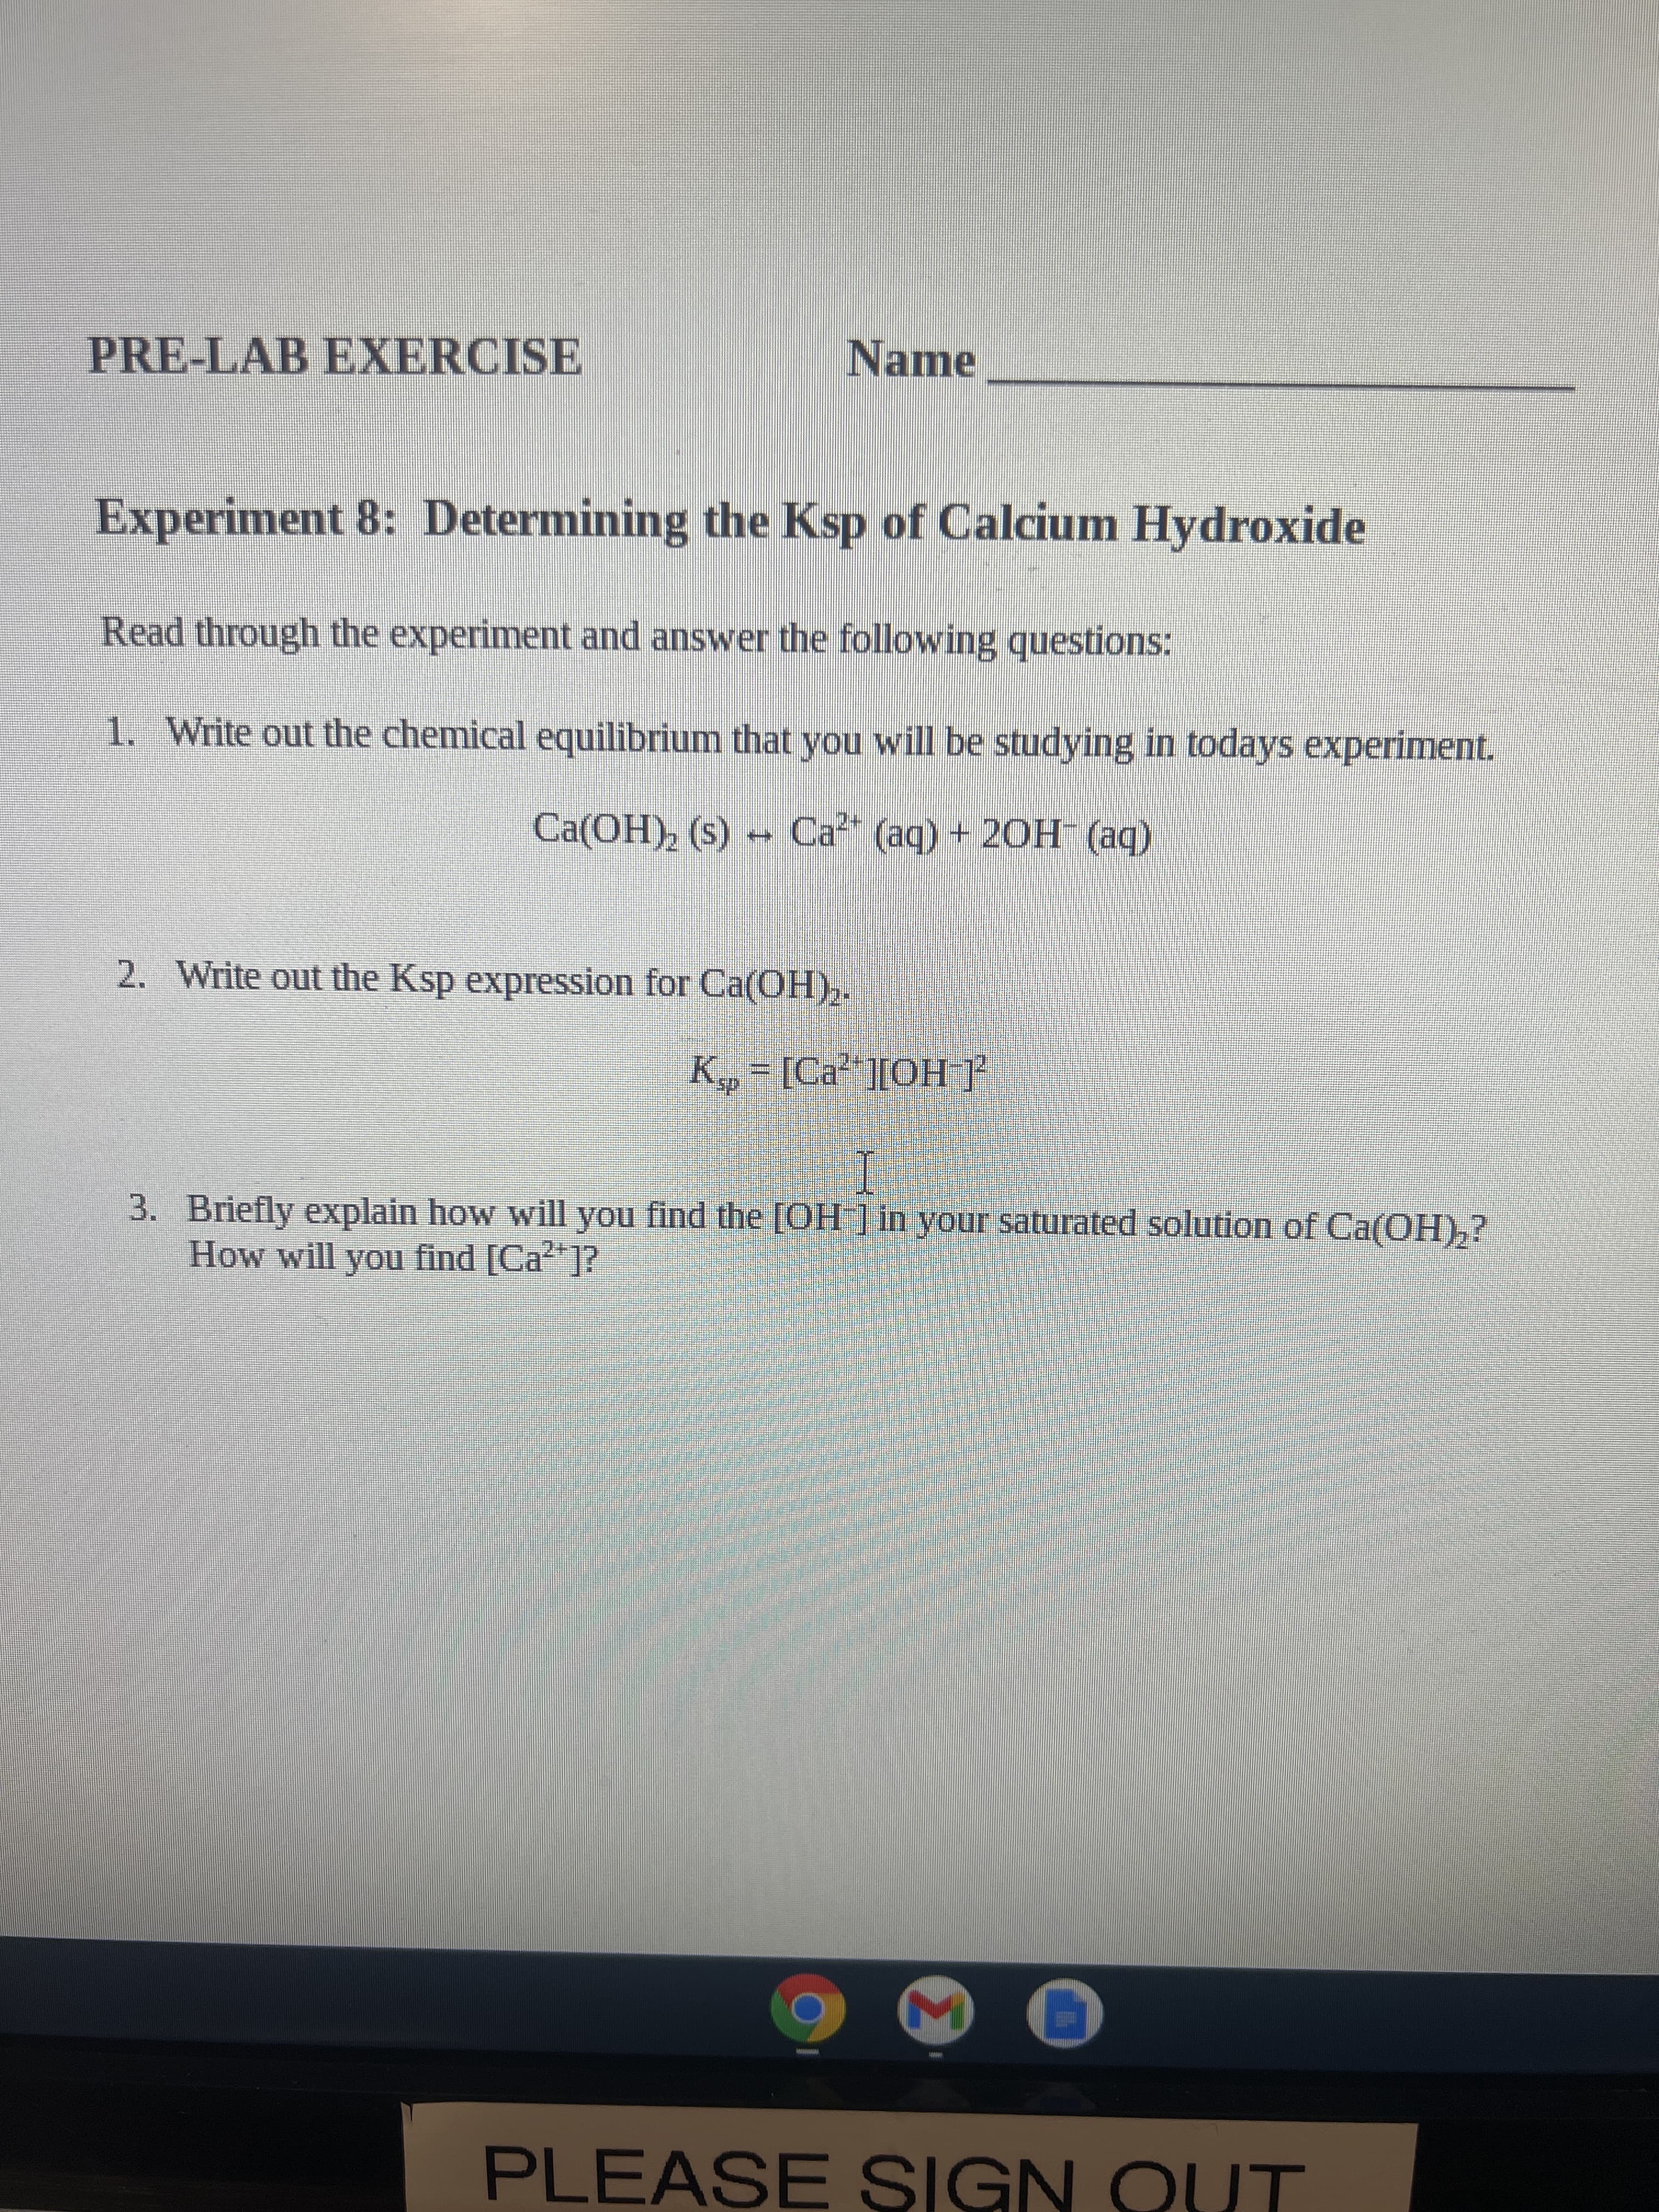 PRE-LAB EXERCISE
Name
Experiment 8: Determining the Ksp of Calcium Hydroxide
Read through the experiment and answer the following questions:
1. Write out the chemical equilibrium that you will be studying in todays experiment.
(be) _HO7 + (be) PƆ - (s) (HO
2. Write out the Ksp expression for Ca(OH),-
3. Briefly explain how will you find the [OH ] in your saturated solution of Ca(OH),?
How will you find [Ca*]?
PLEASE SIGN QUT
